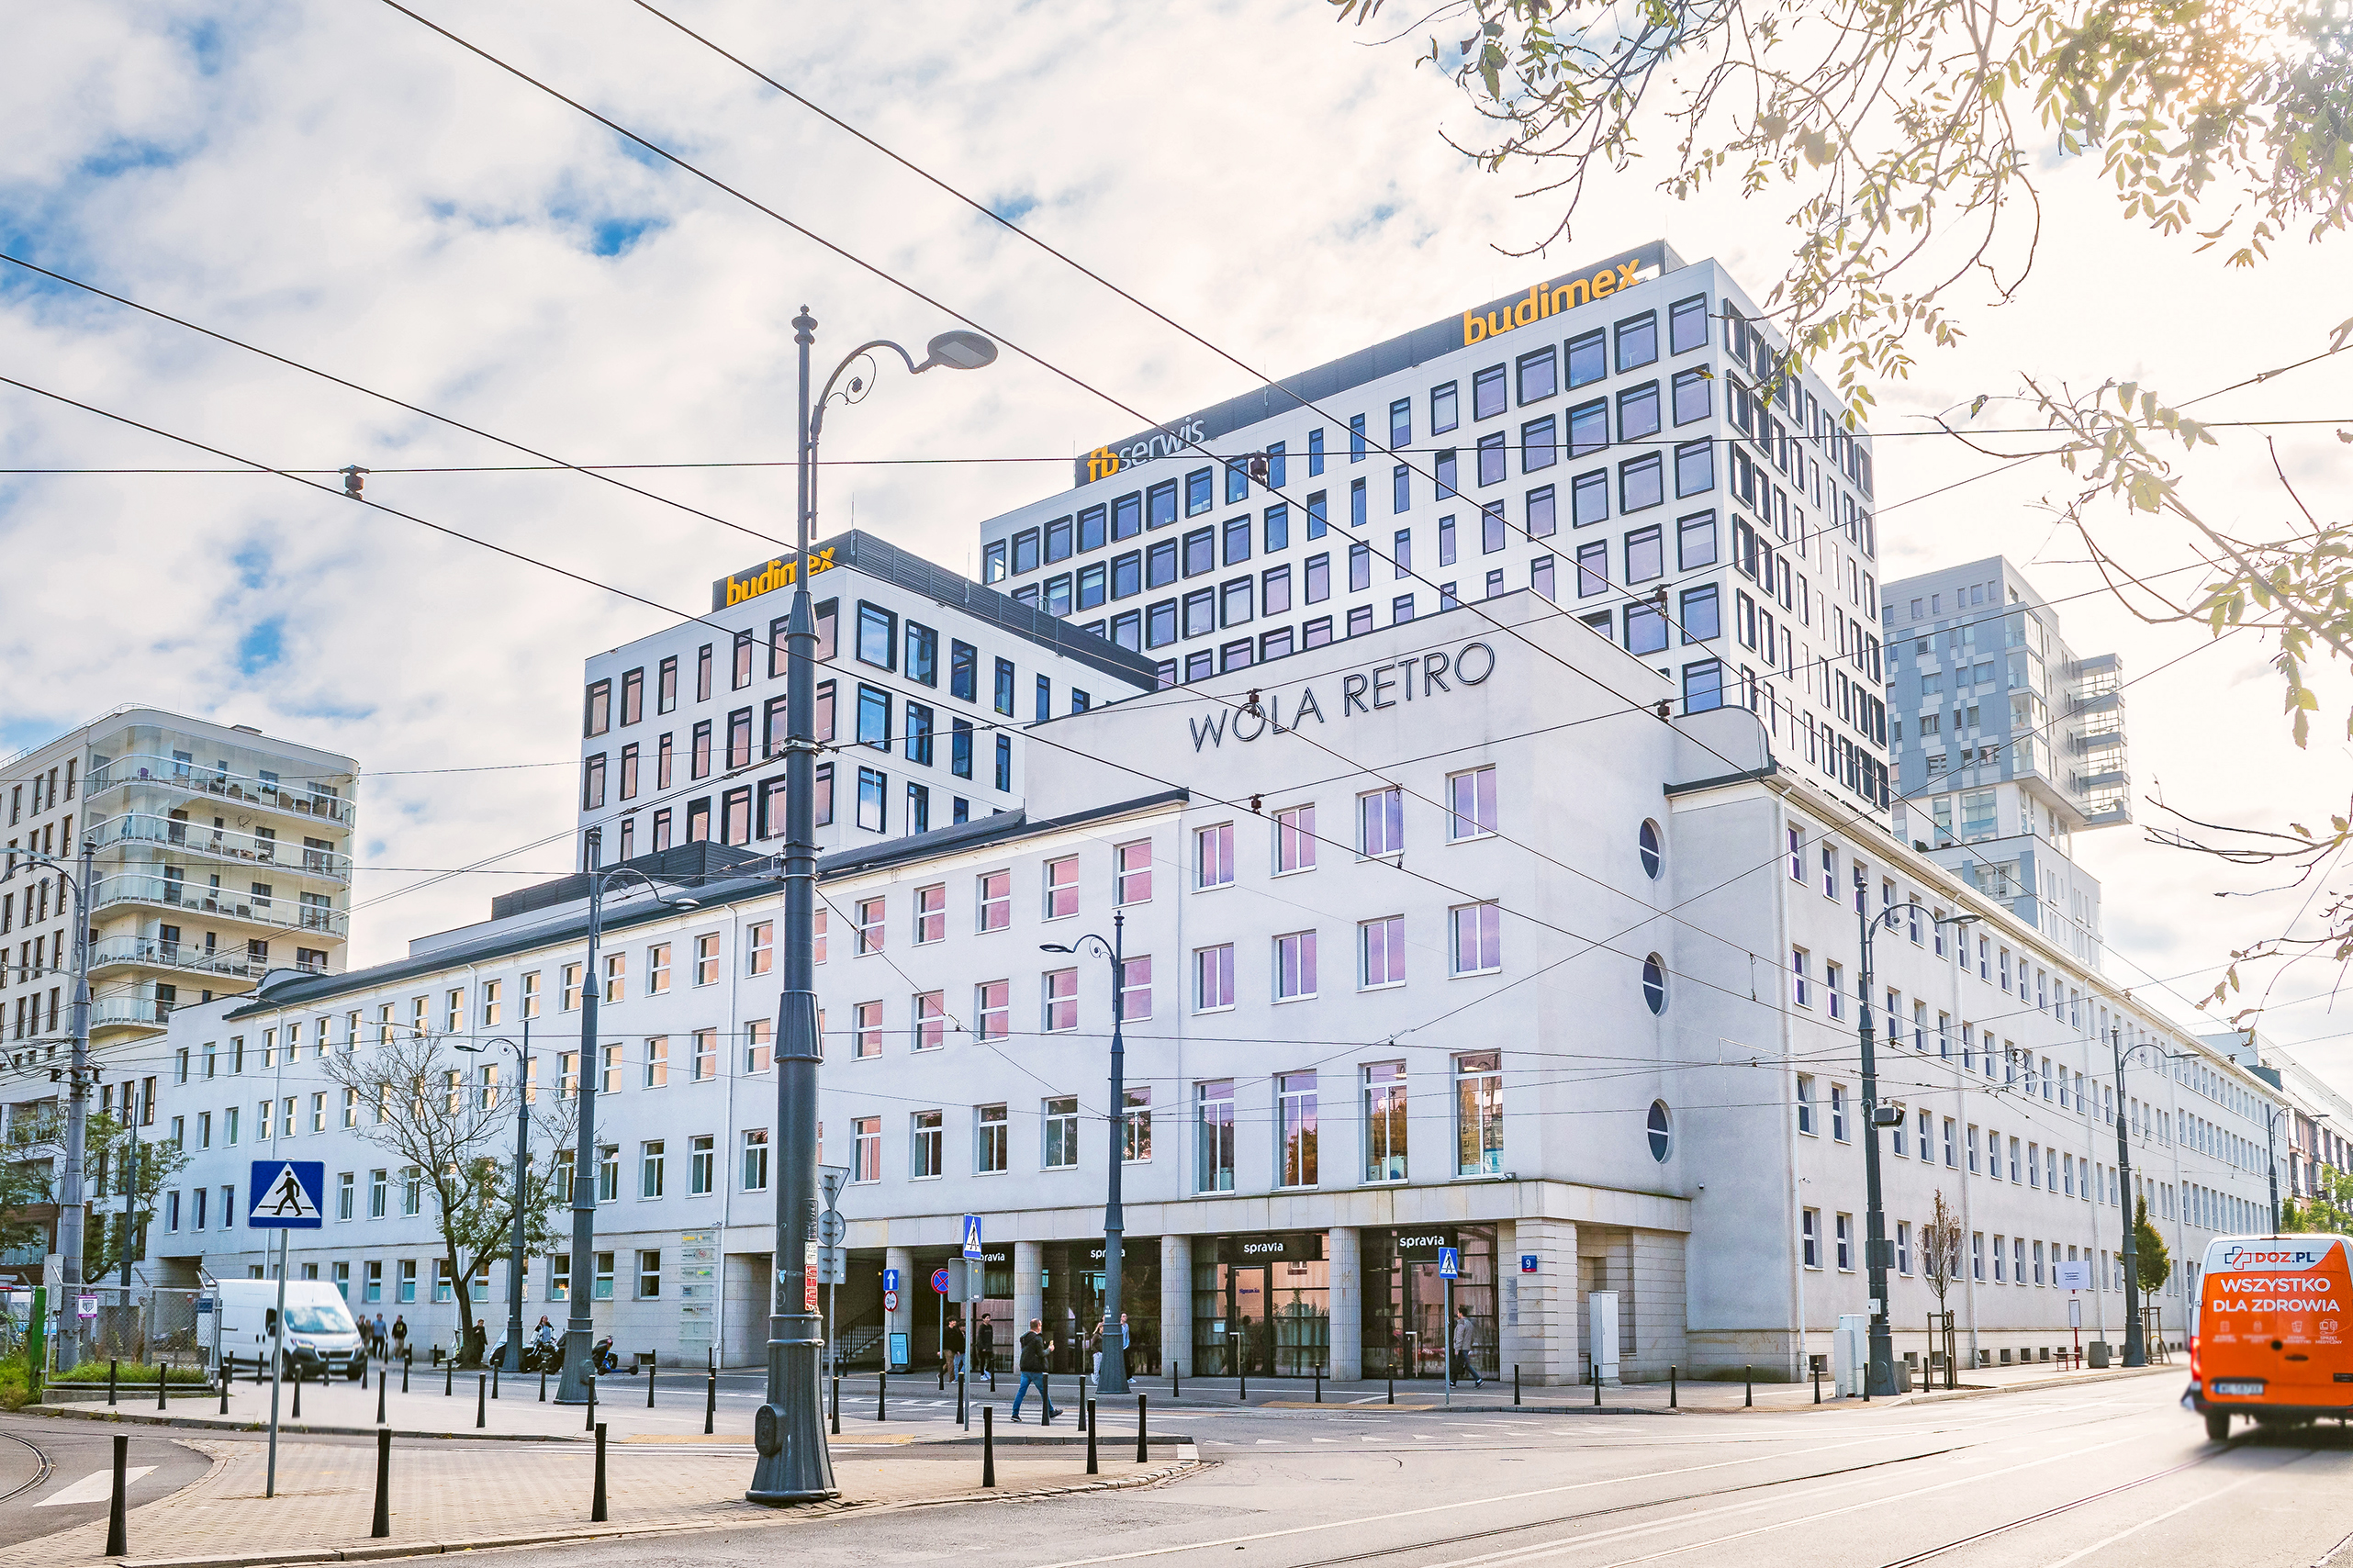 Hungary’s Adventum Agrees to Purchase Wola Retro in Warsaw